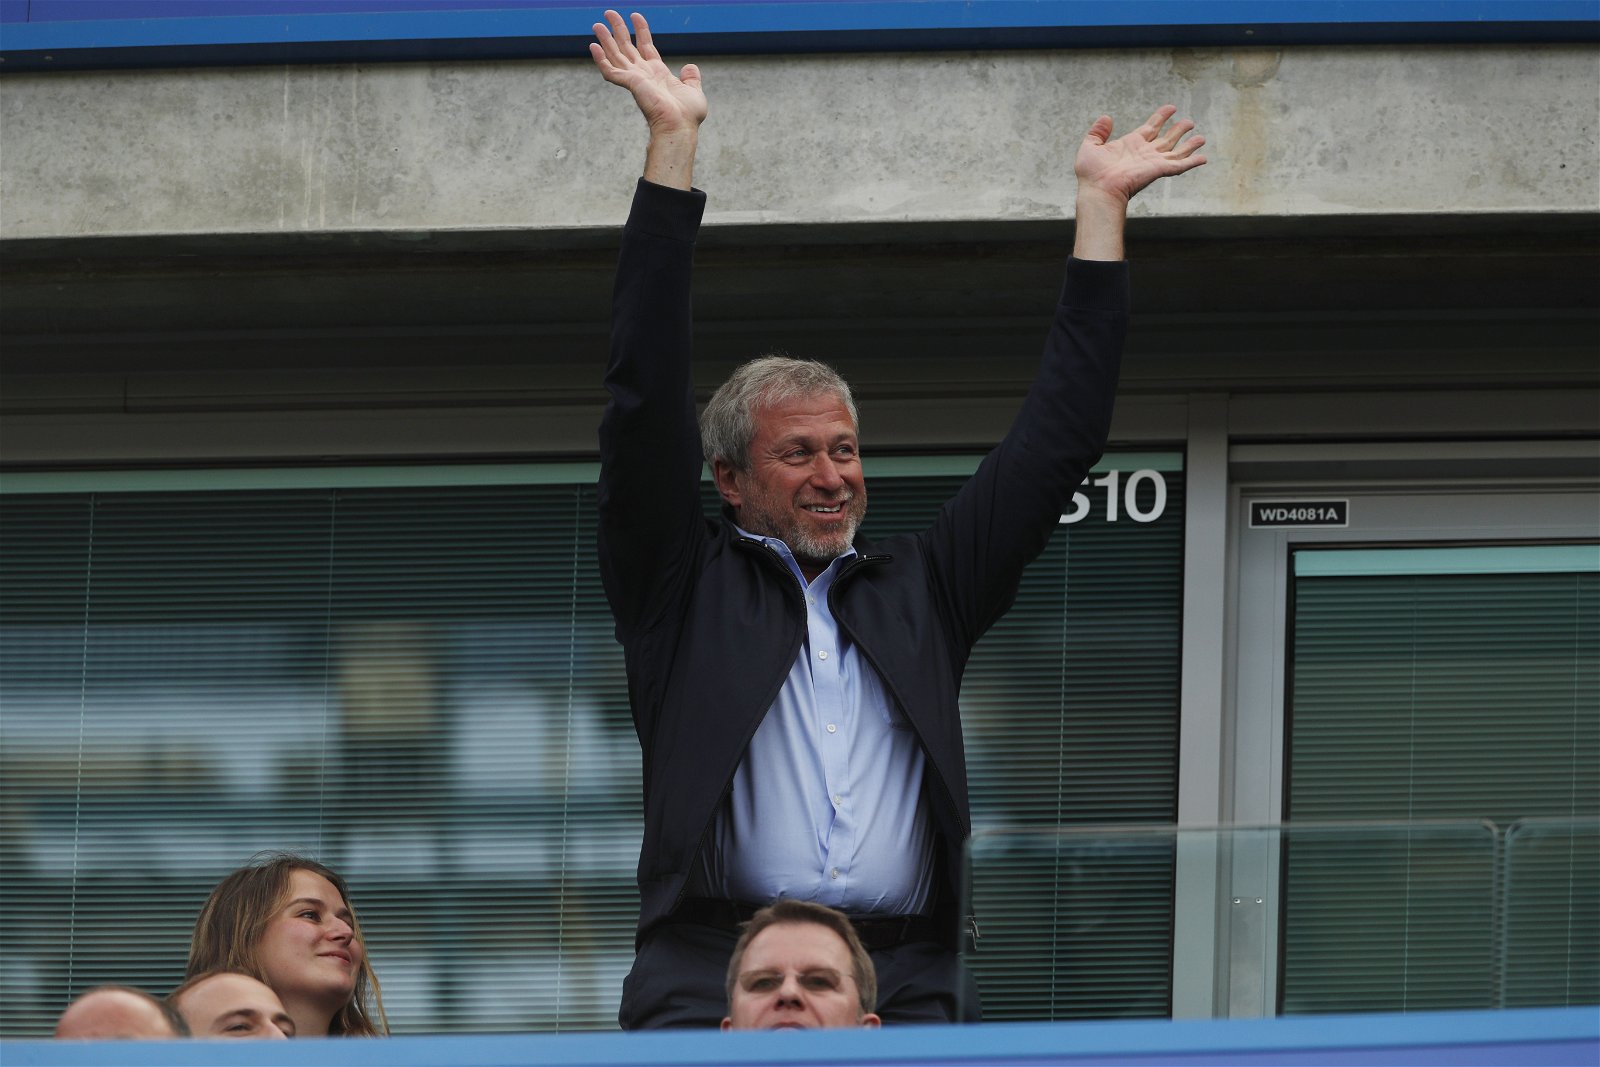 Italian journalist claims Chelsea are not a 'mad sacking club' and defends Abramovich